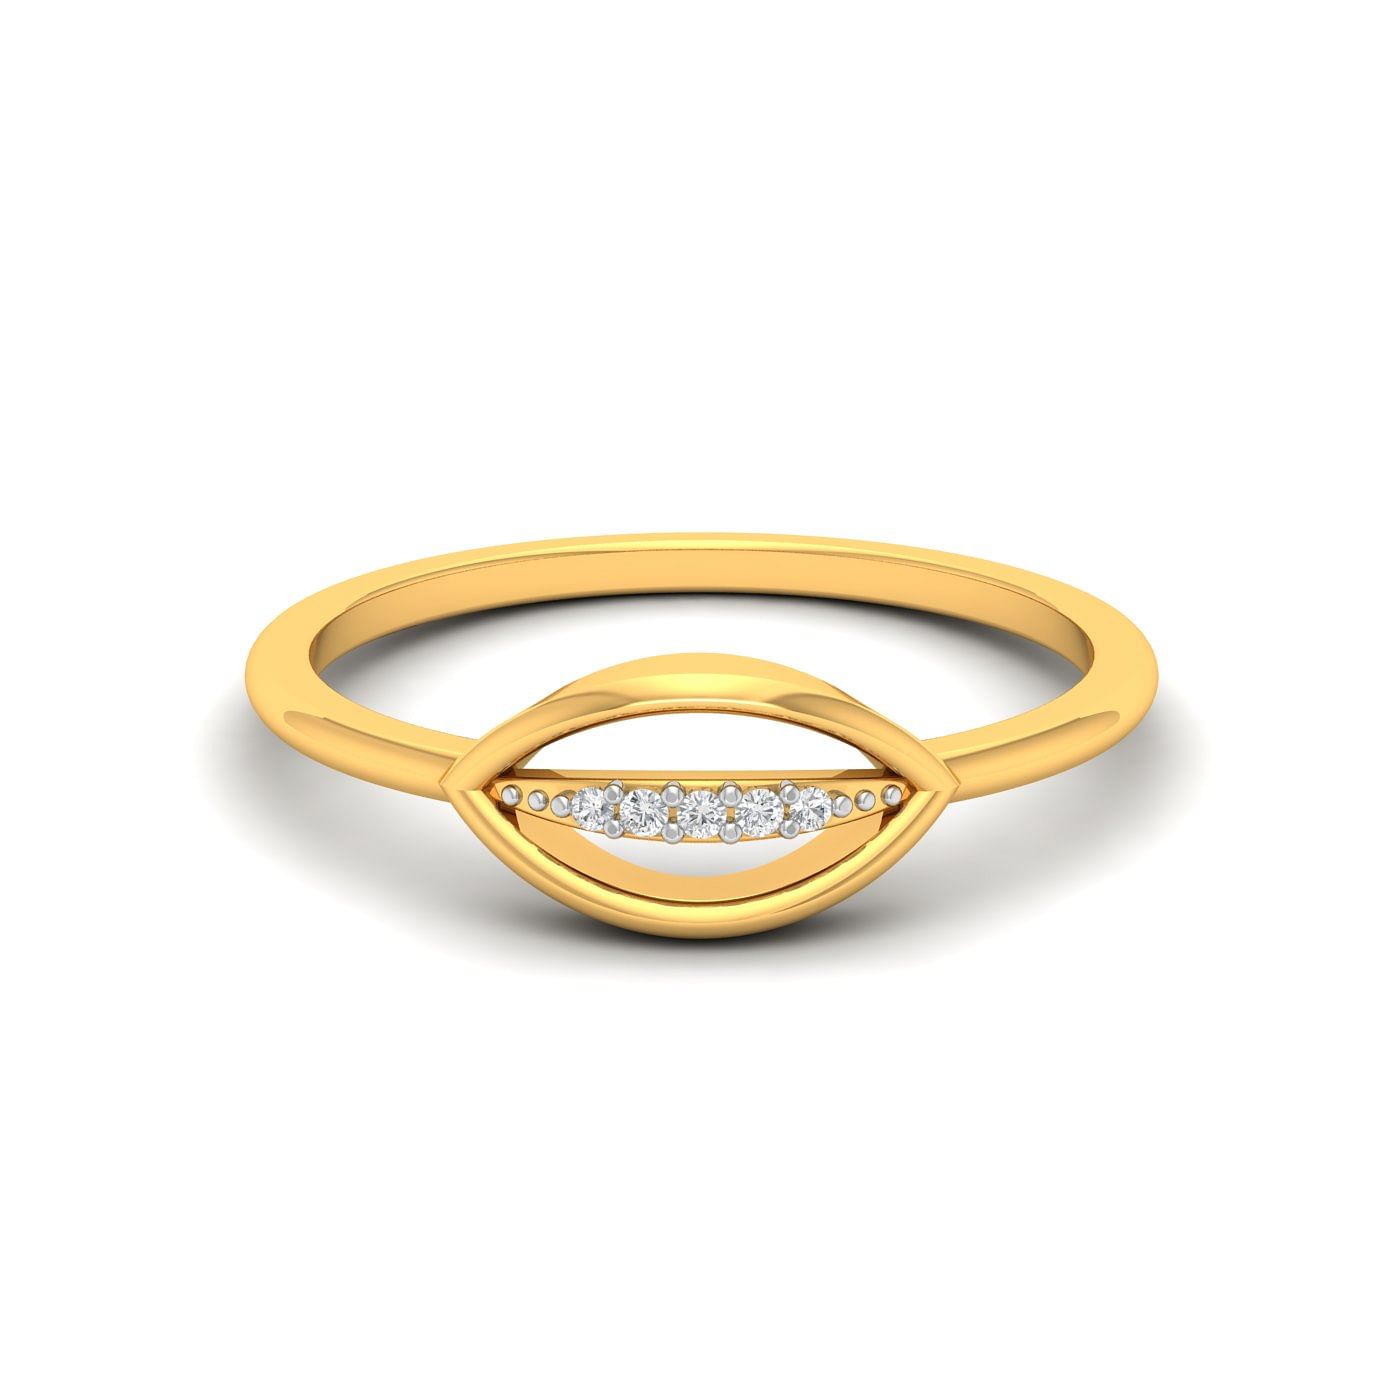 Light weight Cardamom Delicate Diamond Ring For anniversary gift